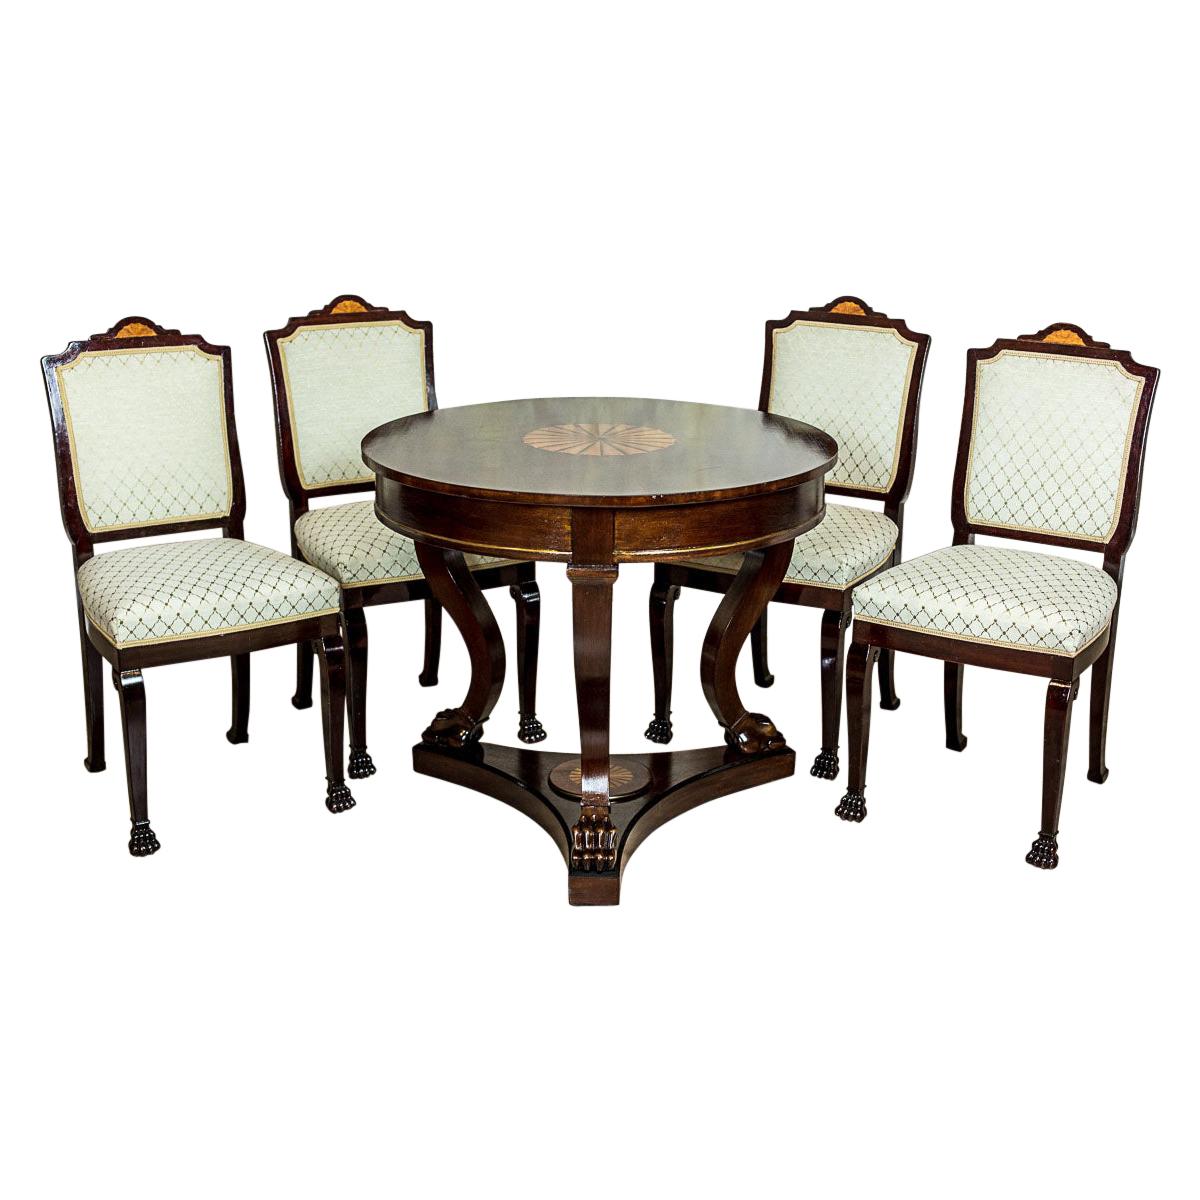 20th Century Stylized, Round Table with Upholstered Chairs